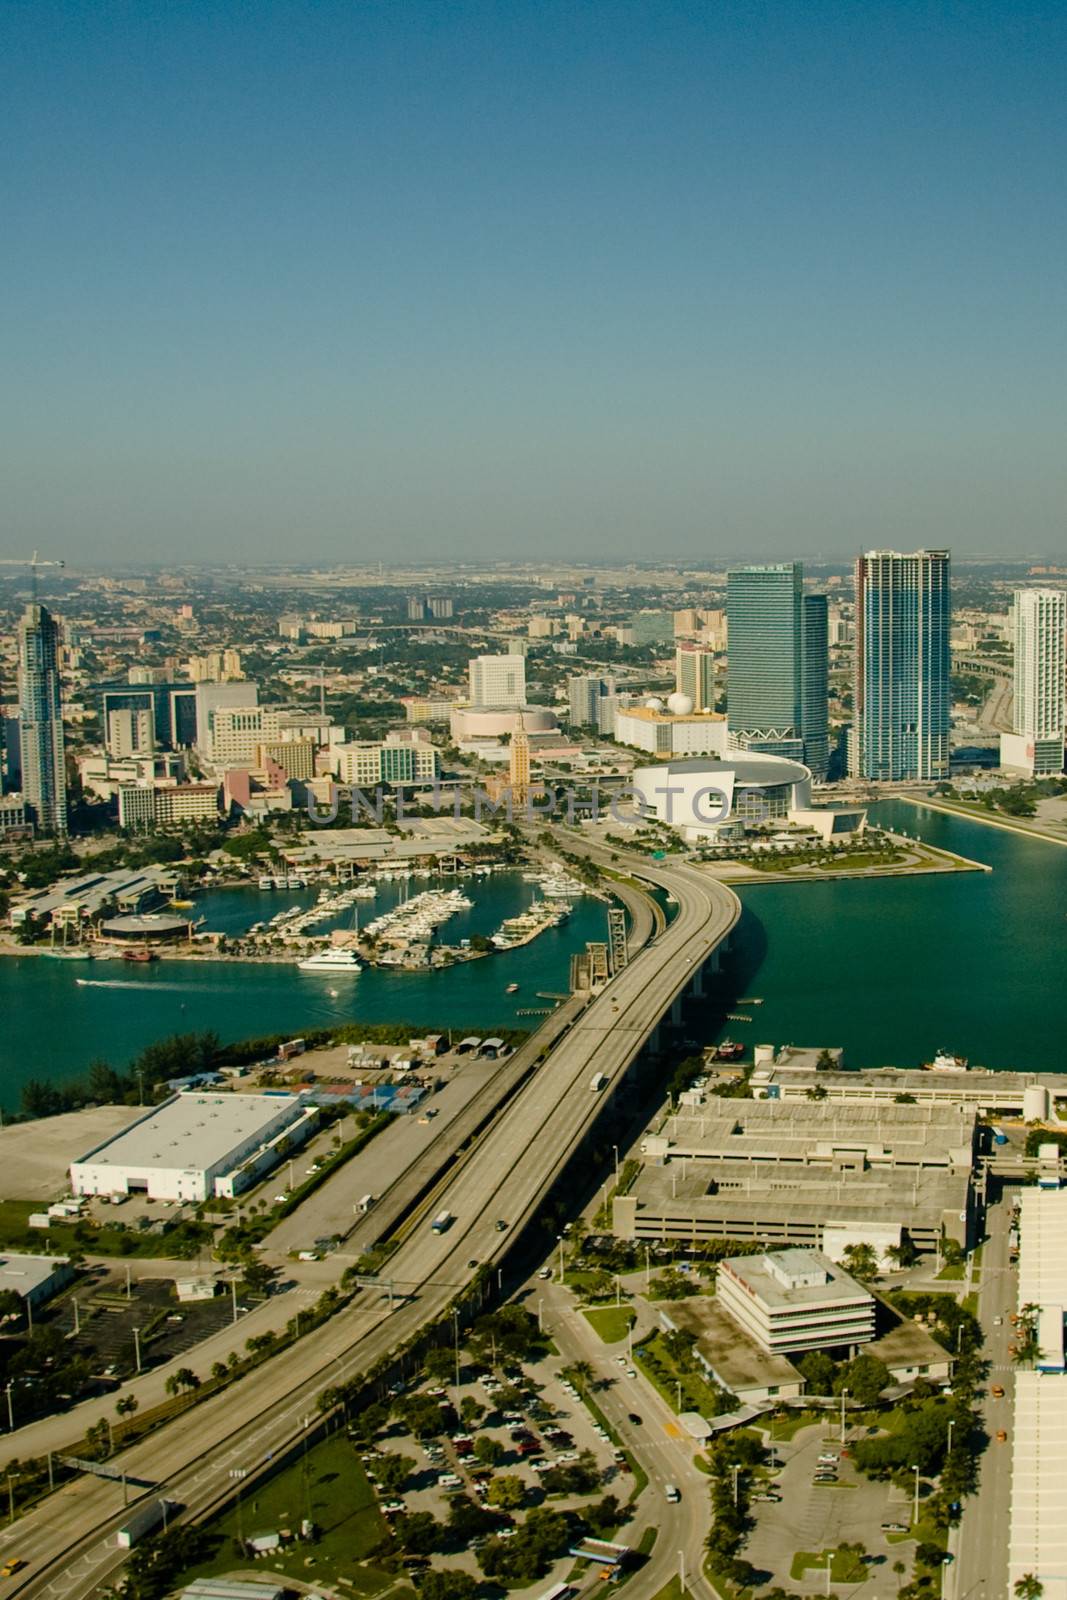 Aerial view of buildings in a city at the waterfront, Port Boulevard, Miami, Miami-Dade County, Florida, USA